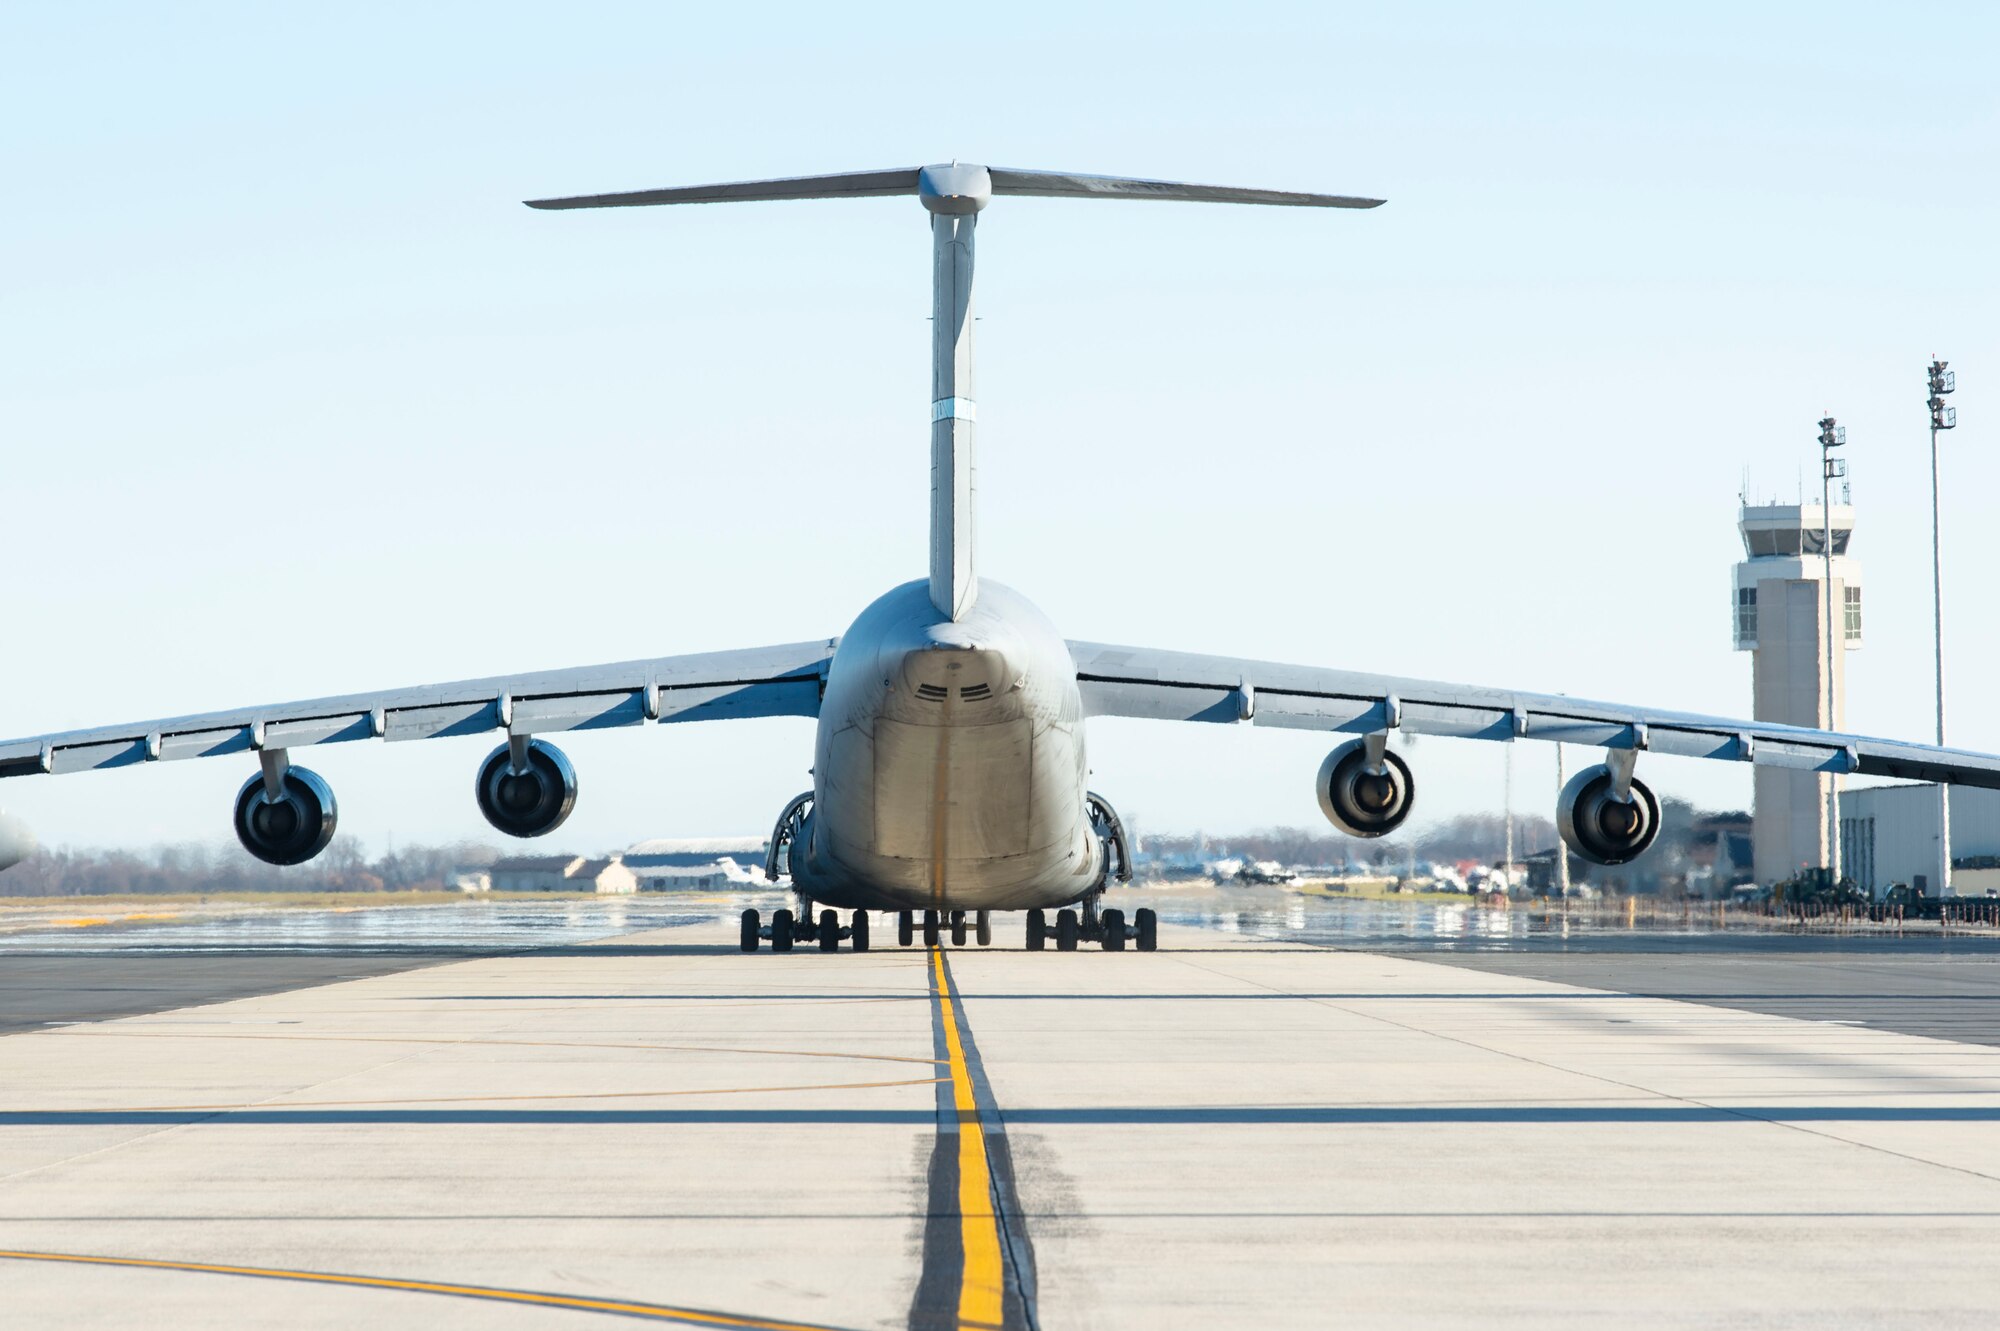 A C-5M Super Galaxy taxis down the flight line toward the runway at Dover Air Force Base, Delaware, Dec. 20, 2021. Eighteen C-5M’s are assigned to Dover AFB, along with 13 C-17 Globemaster IIIs that provide 20 percent of the nation’s outsized airlift capacity. (U.S. Air Force photo by Roland Balik)